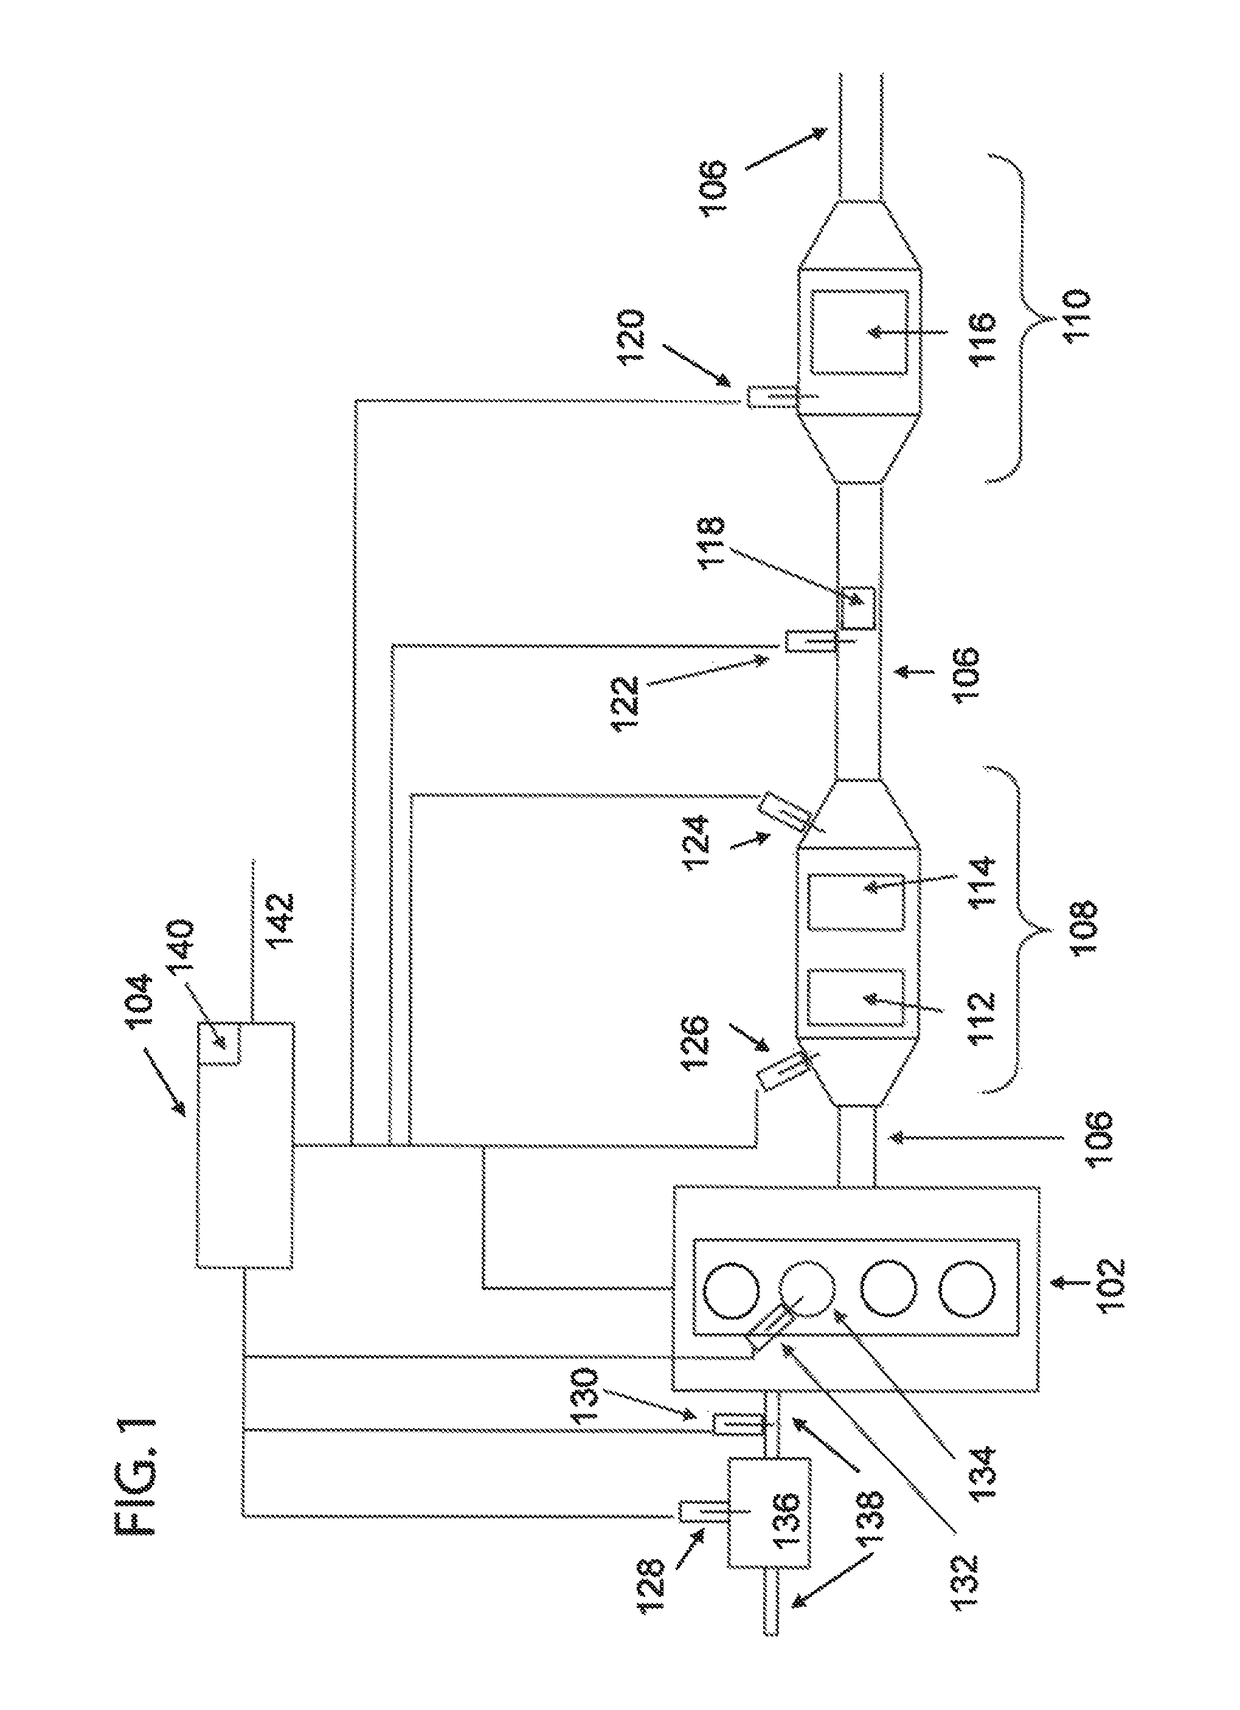 Radio frequency process sensing, control, and diagnostics network and system